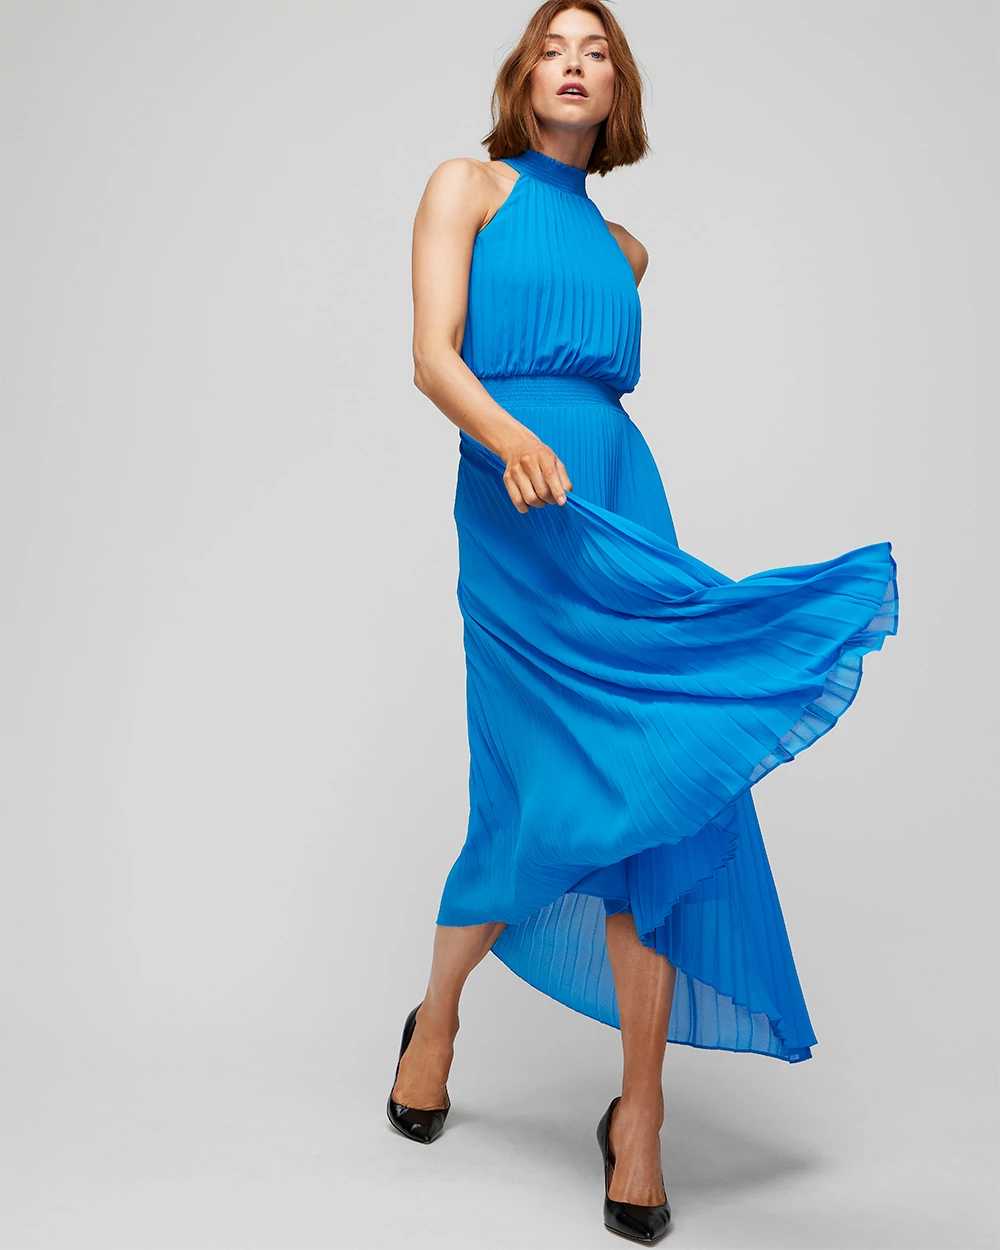 Sleeveless Pleated Halter Midi Dress click to view larger image.